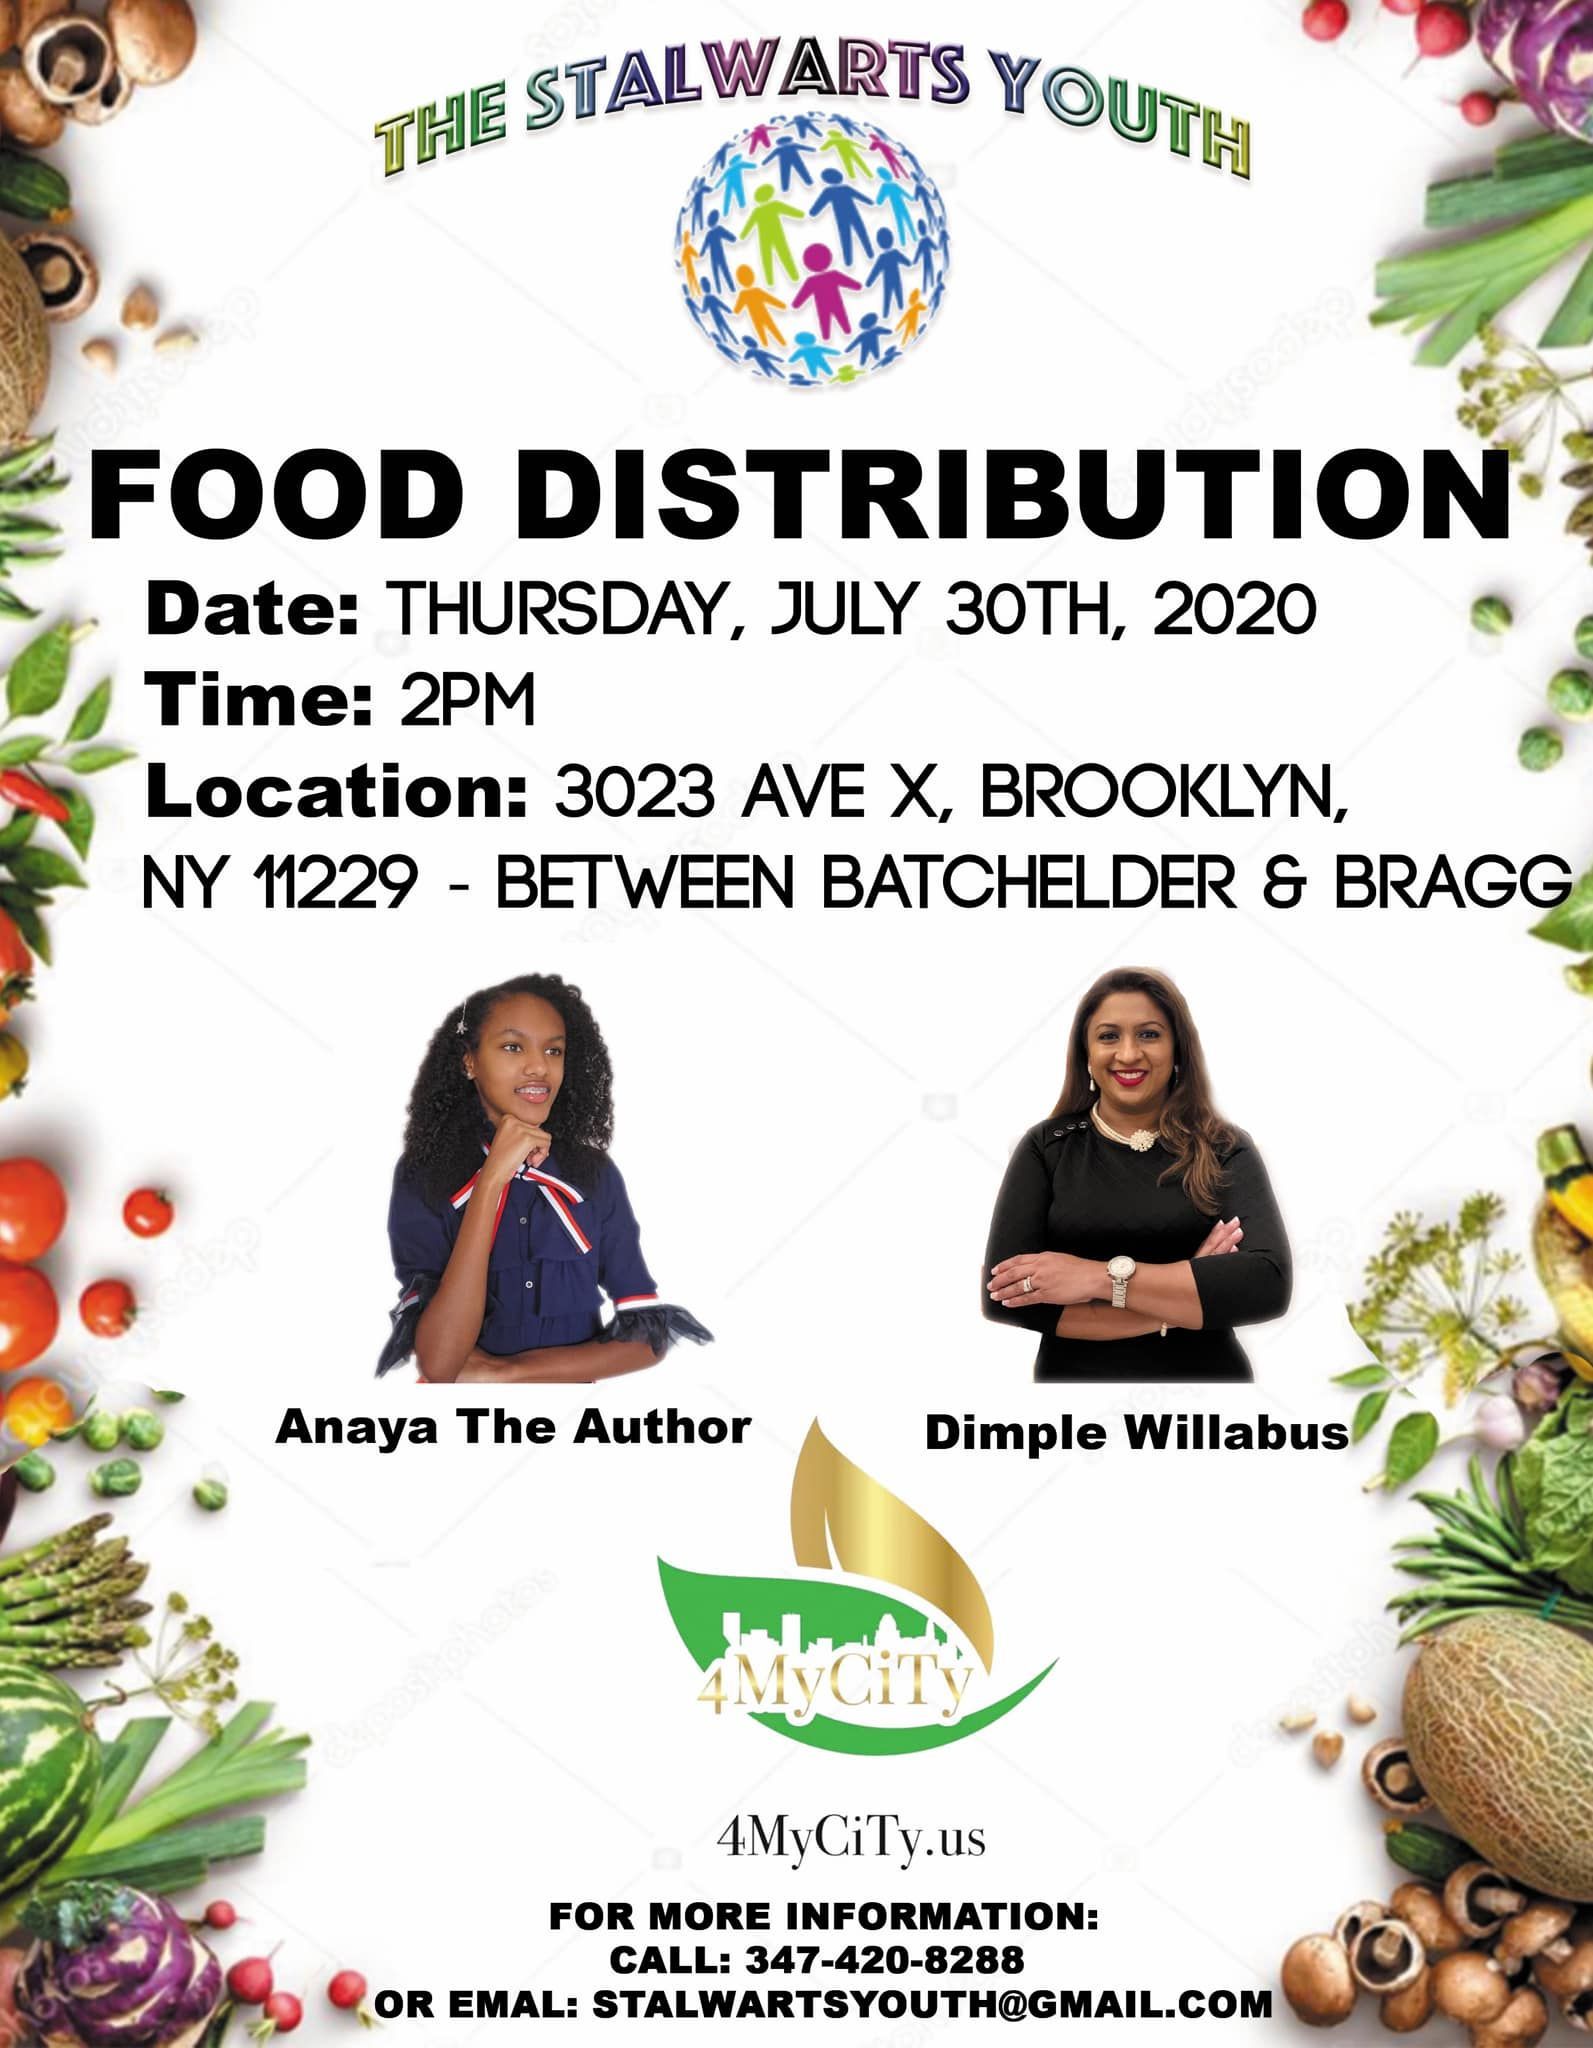 Stalwarts Youth Food Distribution in collaboration with 4MyCity at Avenue X, Brooklyn, NY on July 30, 2020